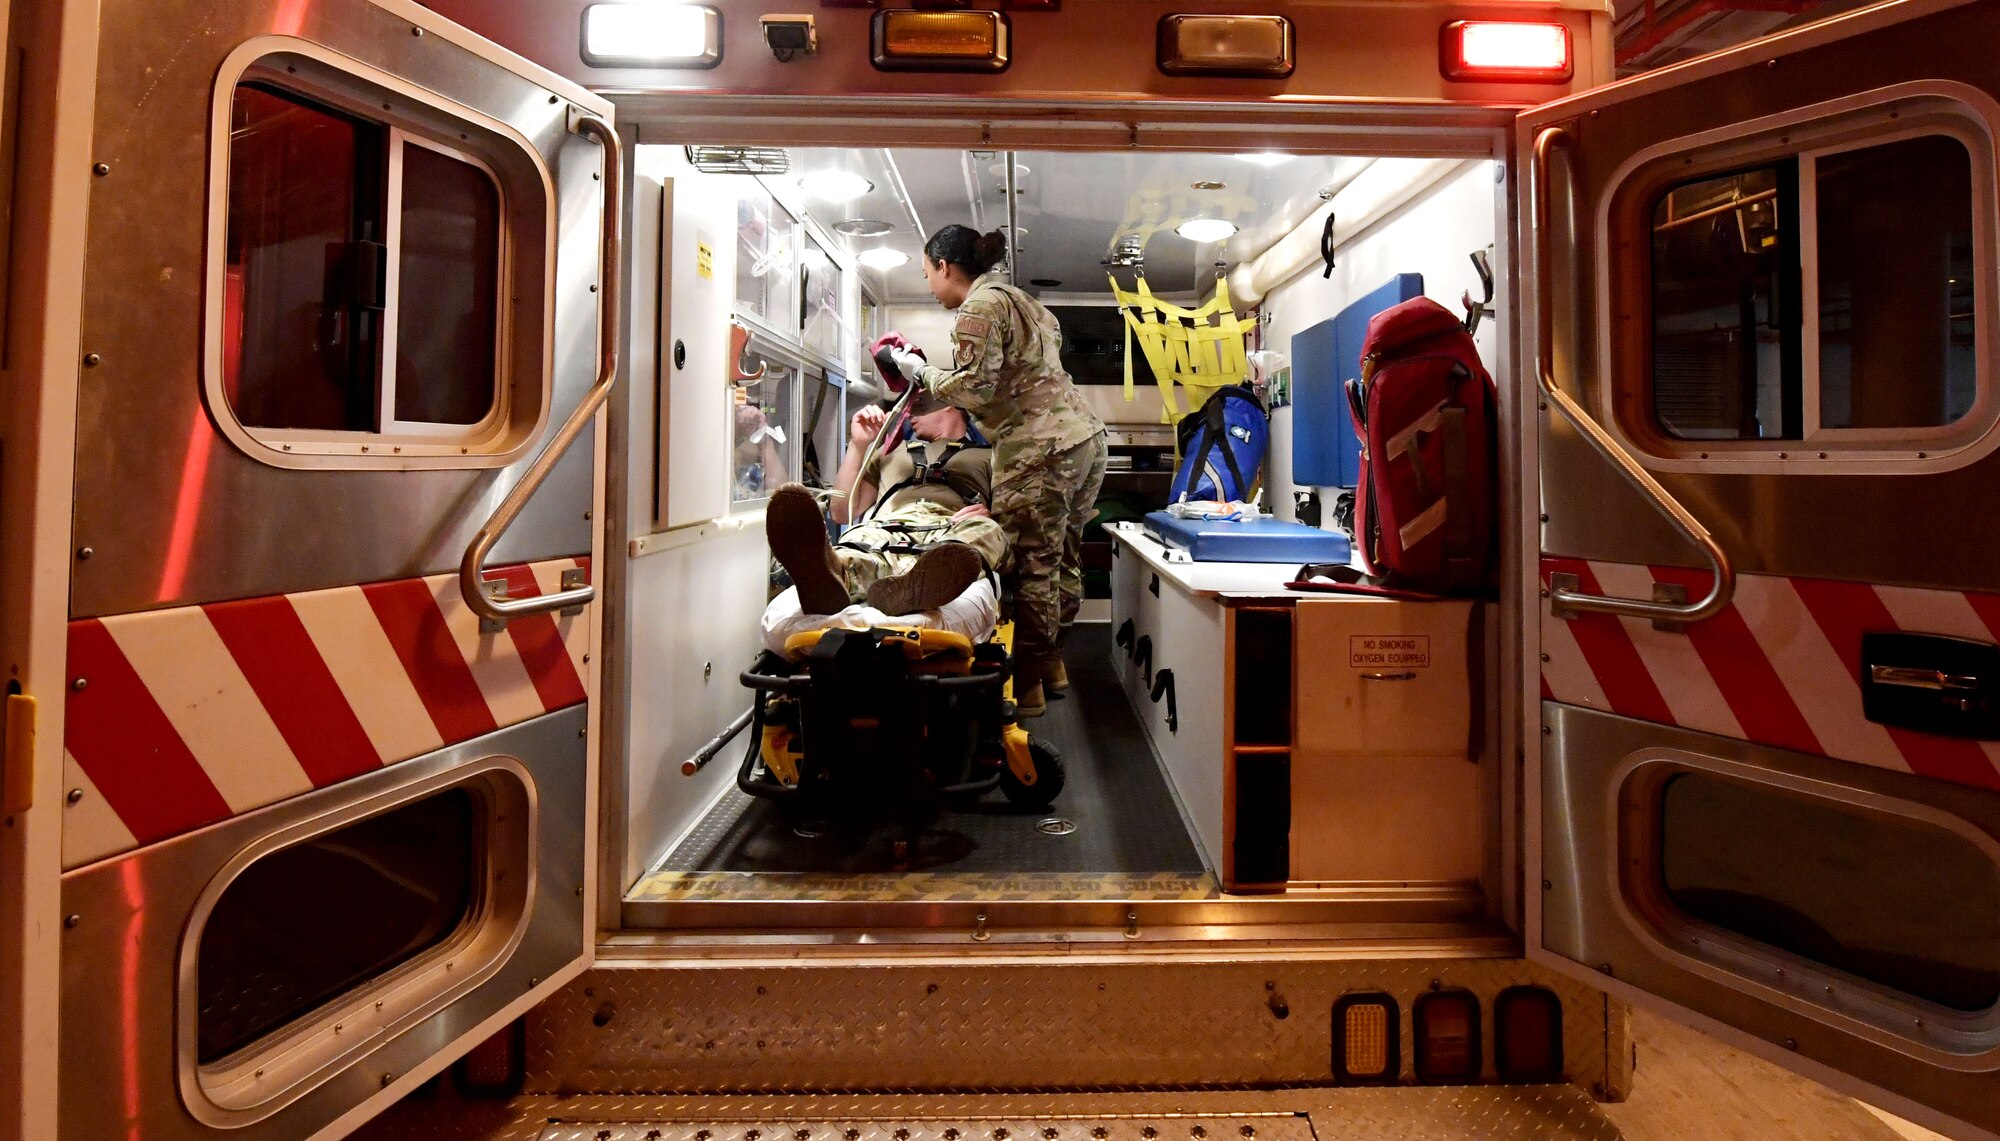 Staff Sgt. Anjelica Scott, 51st Medical Group medical technician, Examines a simulated patient wounds in an ambulance at Osan Air Base, Republic of Korea, Nov. 18, 2020. Scott works in the emergency room here and is one of the first people to respond to incidents on base. (U.S. Air Force photo by Senior Airman Noah Sudolcan)